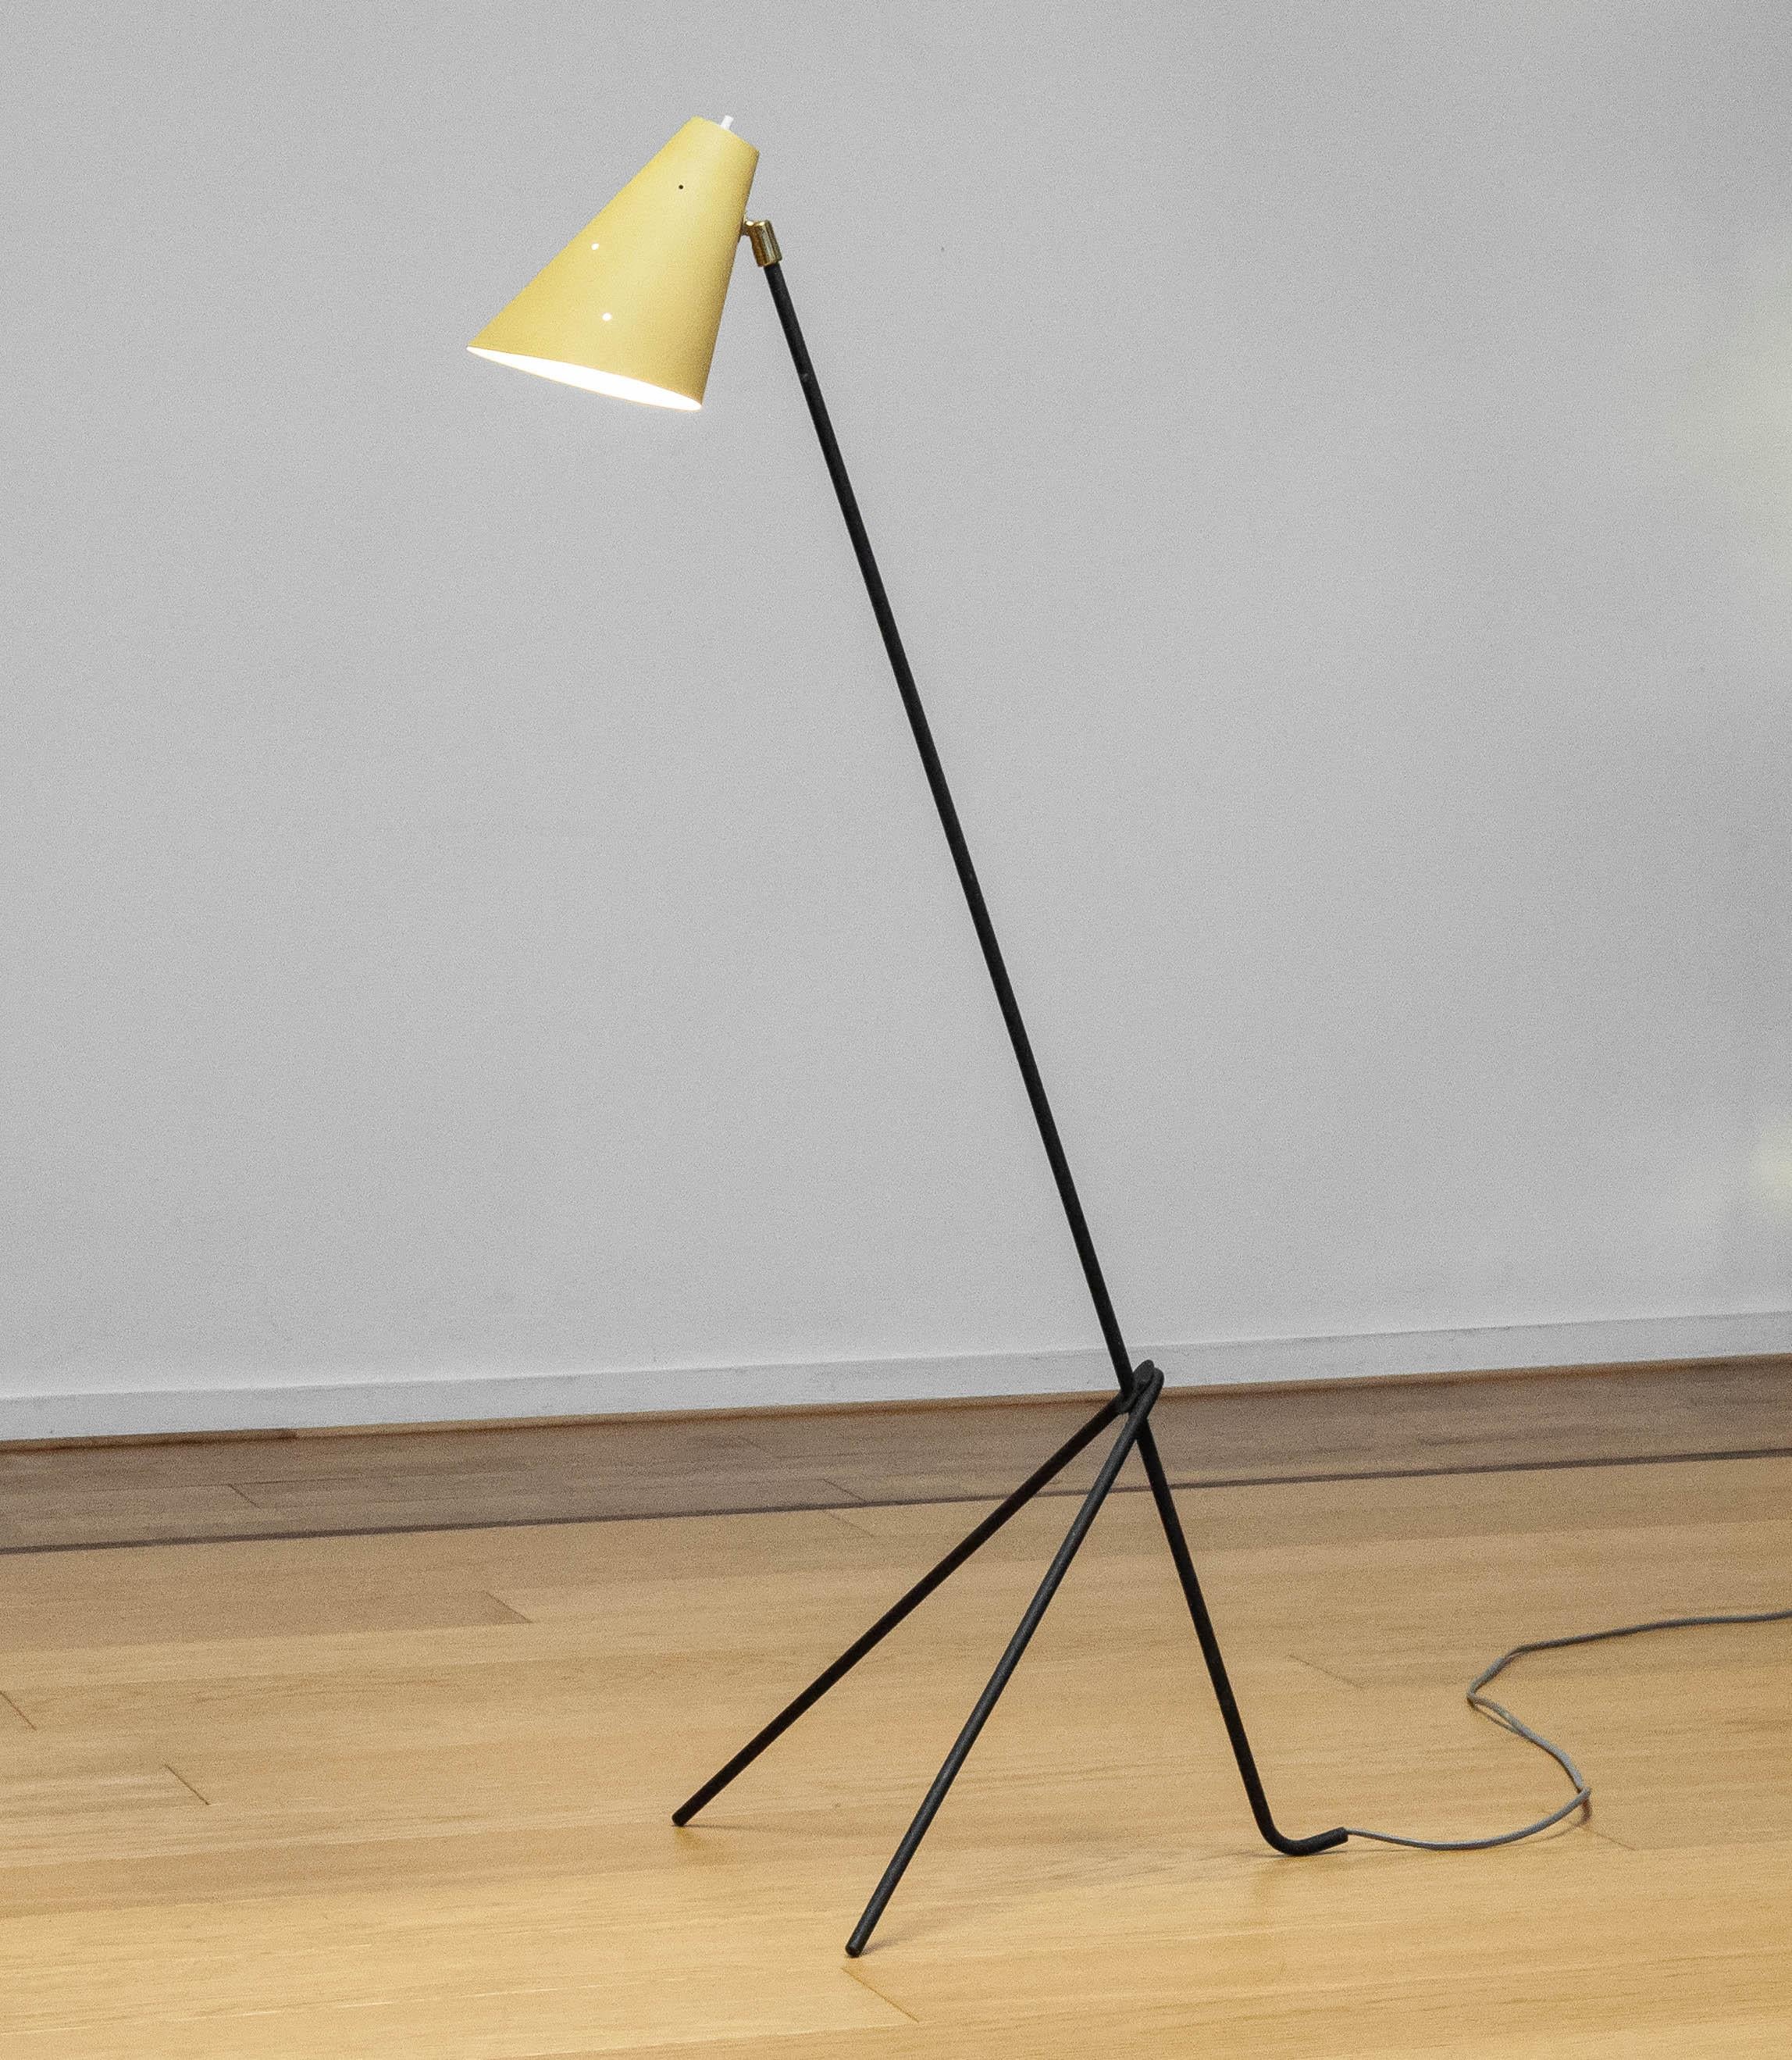 Beautiful early mid-century reading lamp in the famous grasshopper or giraffe model.  Numbered: B-7401.
The tubular metal frame is lacquered with black hammer paint and the zinc shade is vanilla. The shade is perforated what gives the lamp a